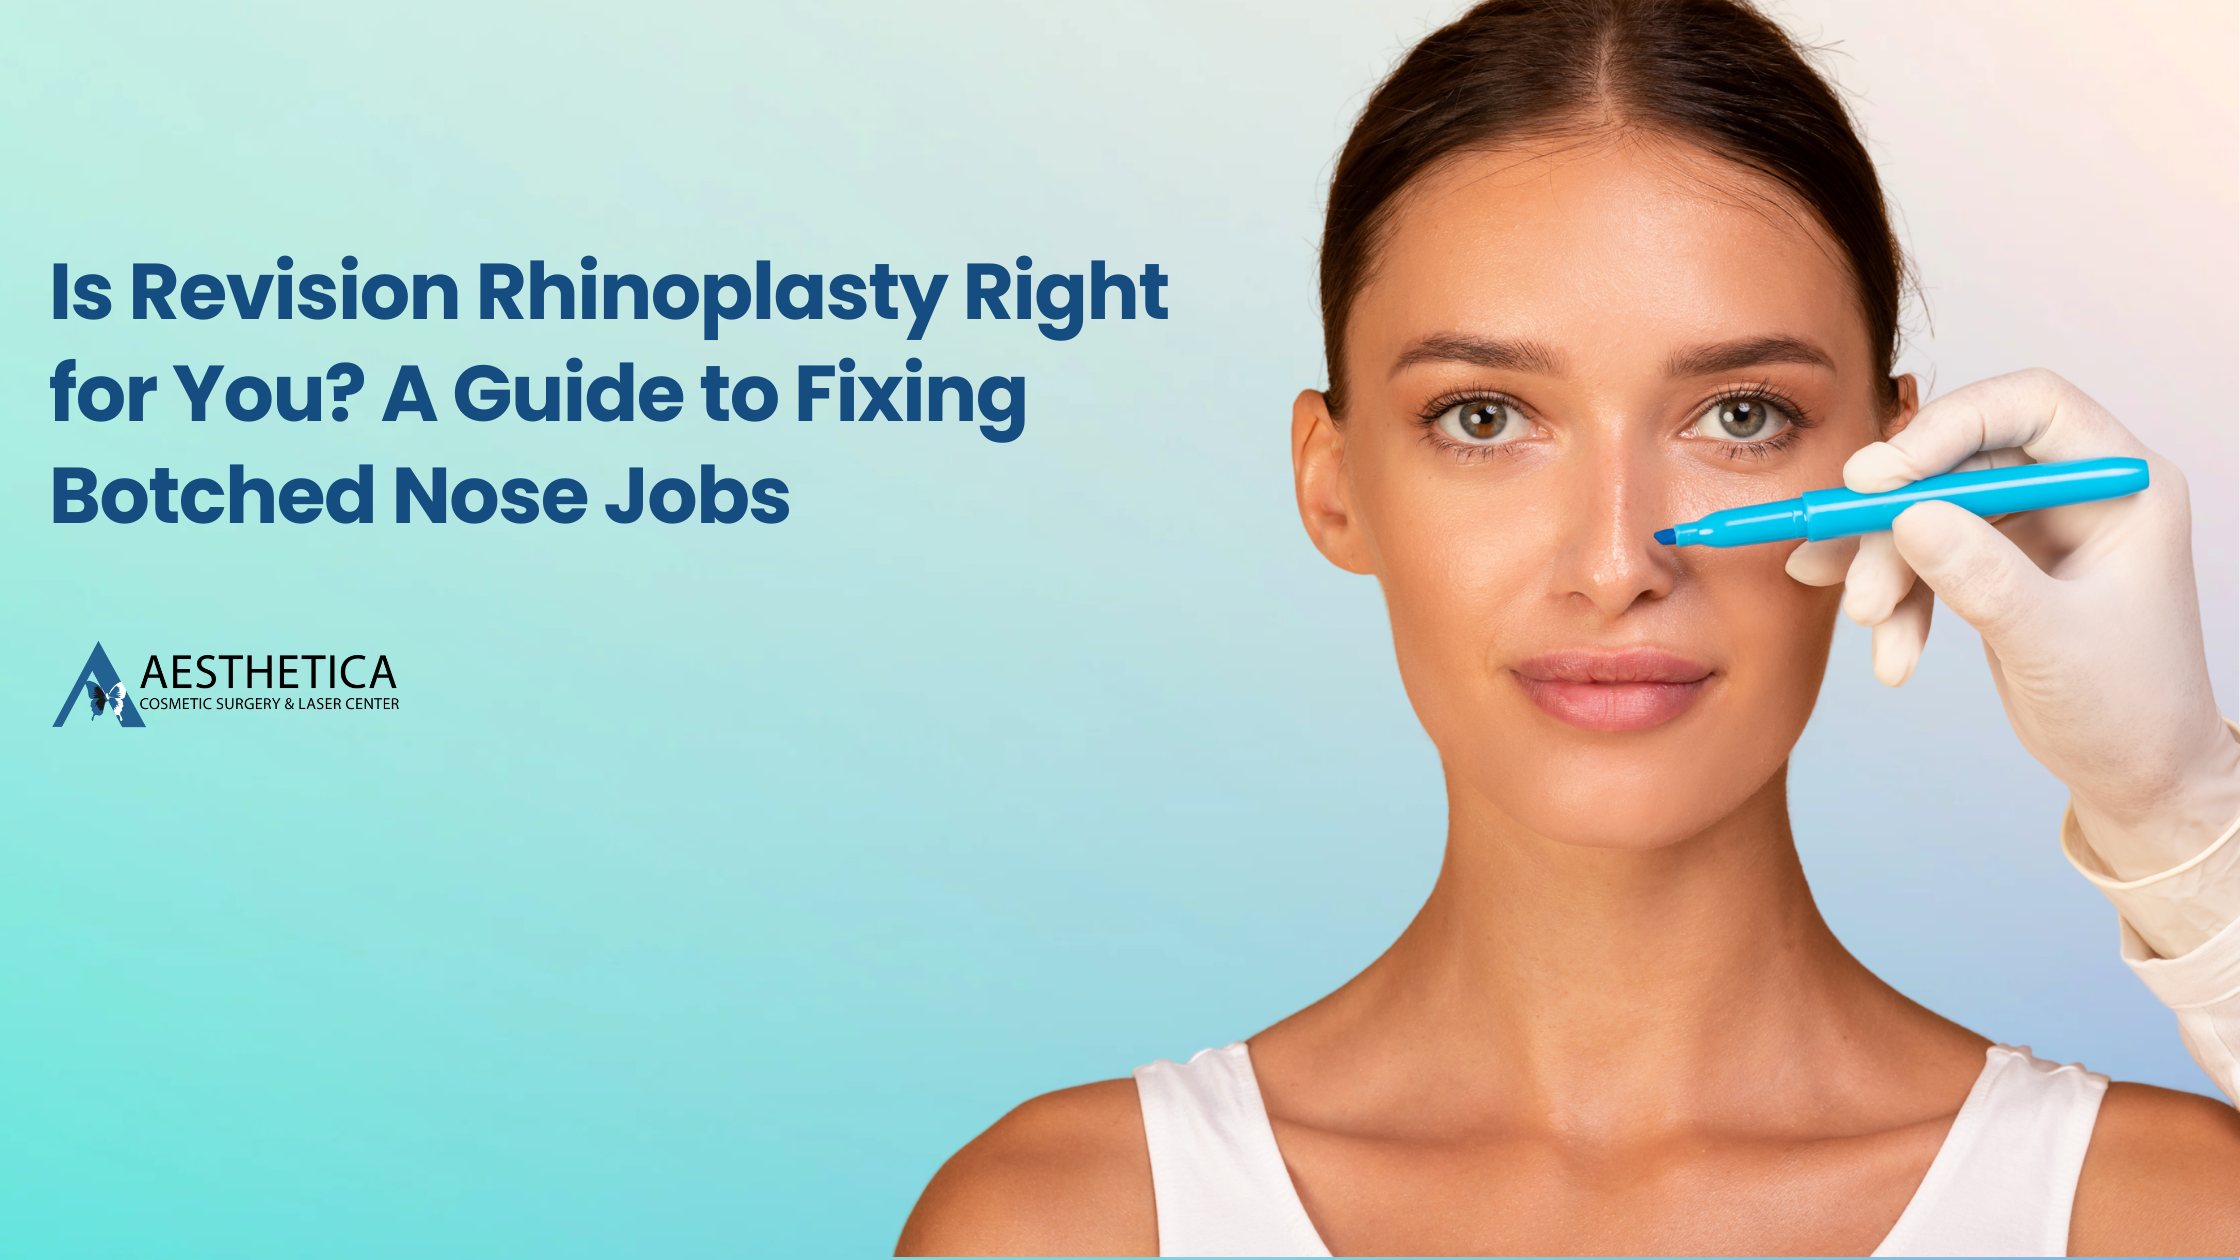 Is Revision Rhinoplasty Right for You? A Guide to Fixing Botched Nose Jobs